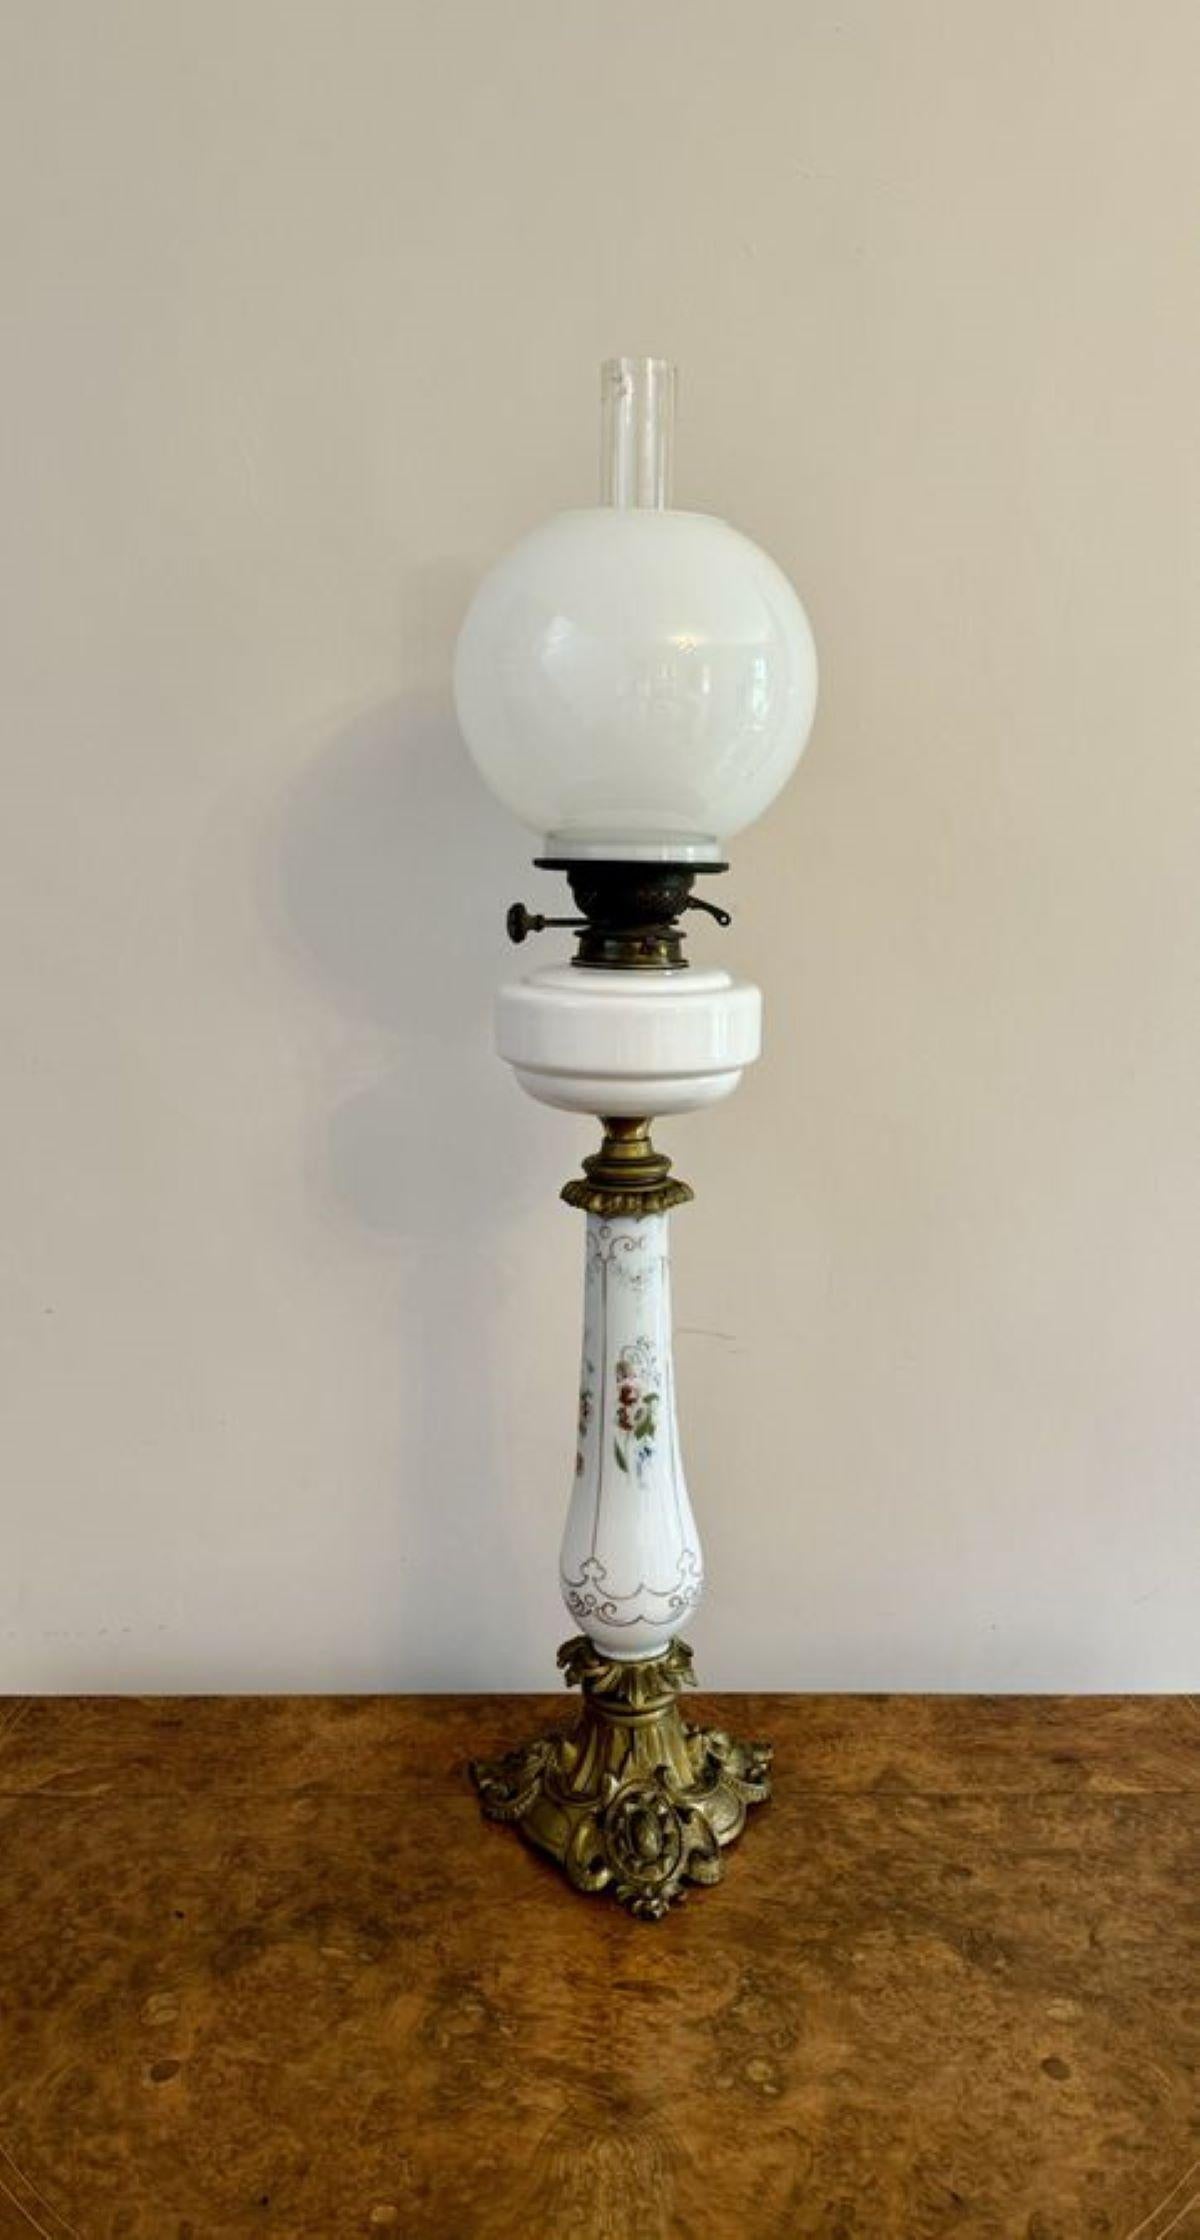 Fantastic quality antique Victorian oil lamp, having a fantastic quality antique Victorian oil lamp, having a double burner, with a white glass globe and glass chimney above a white glass reservoir with a decorated column decorated with flowers hand